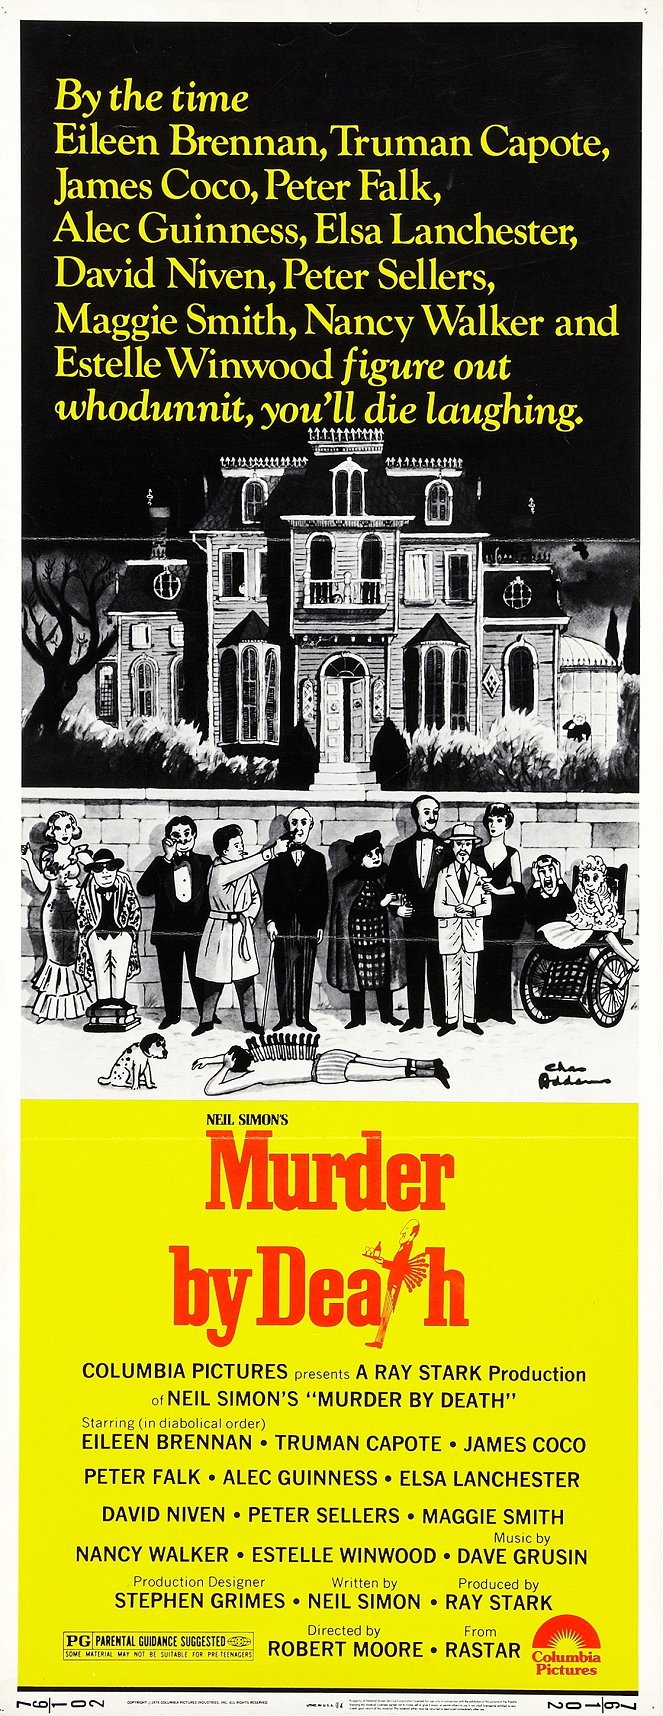 Murder by Death - Posters